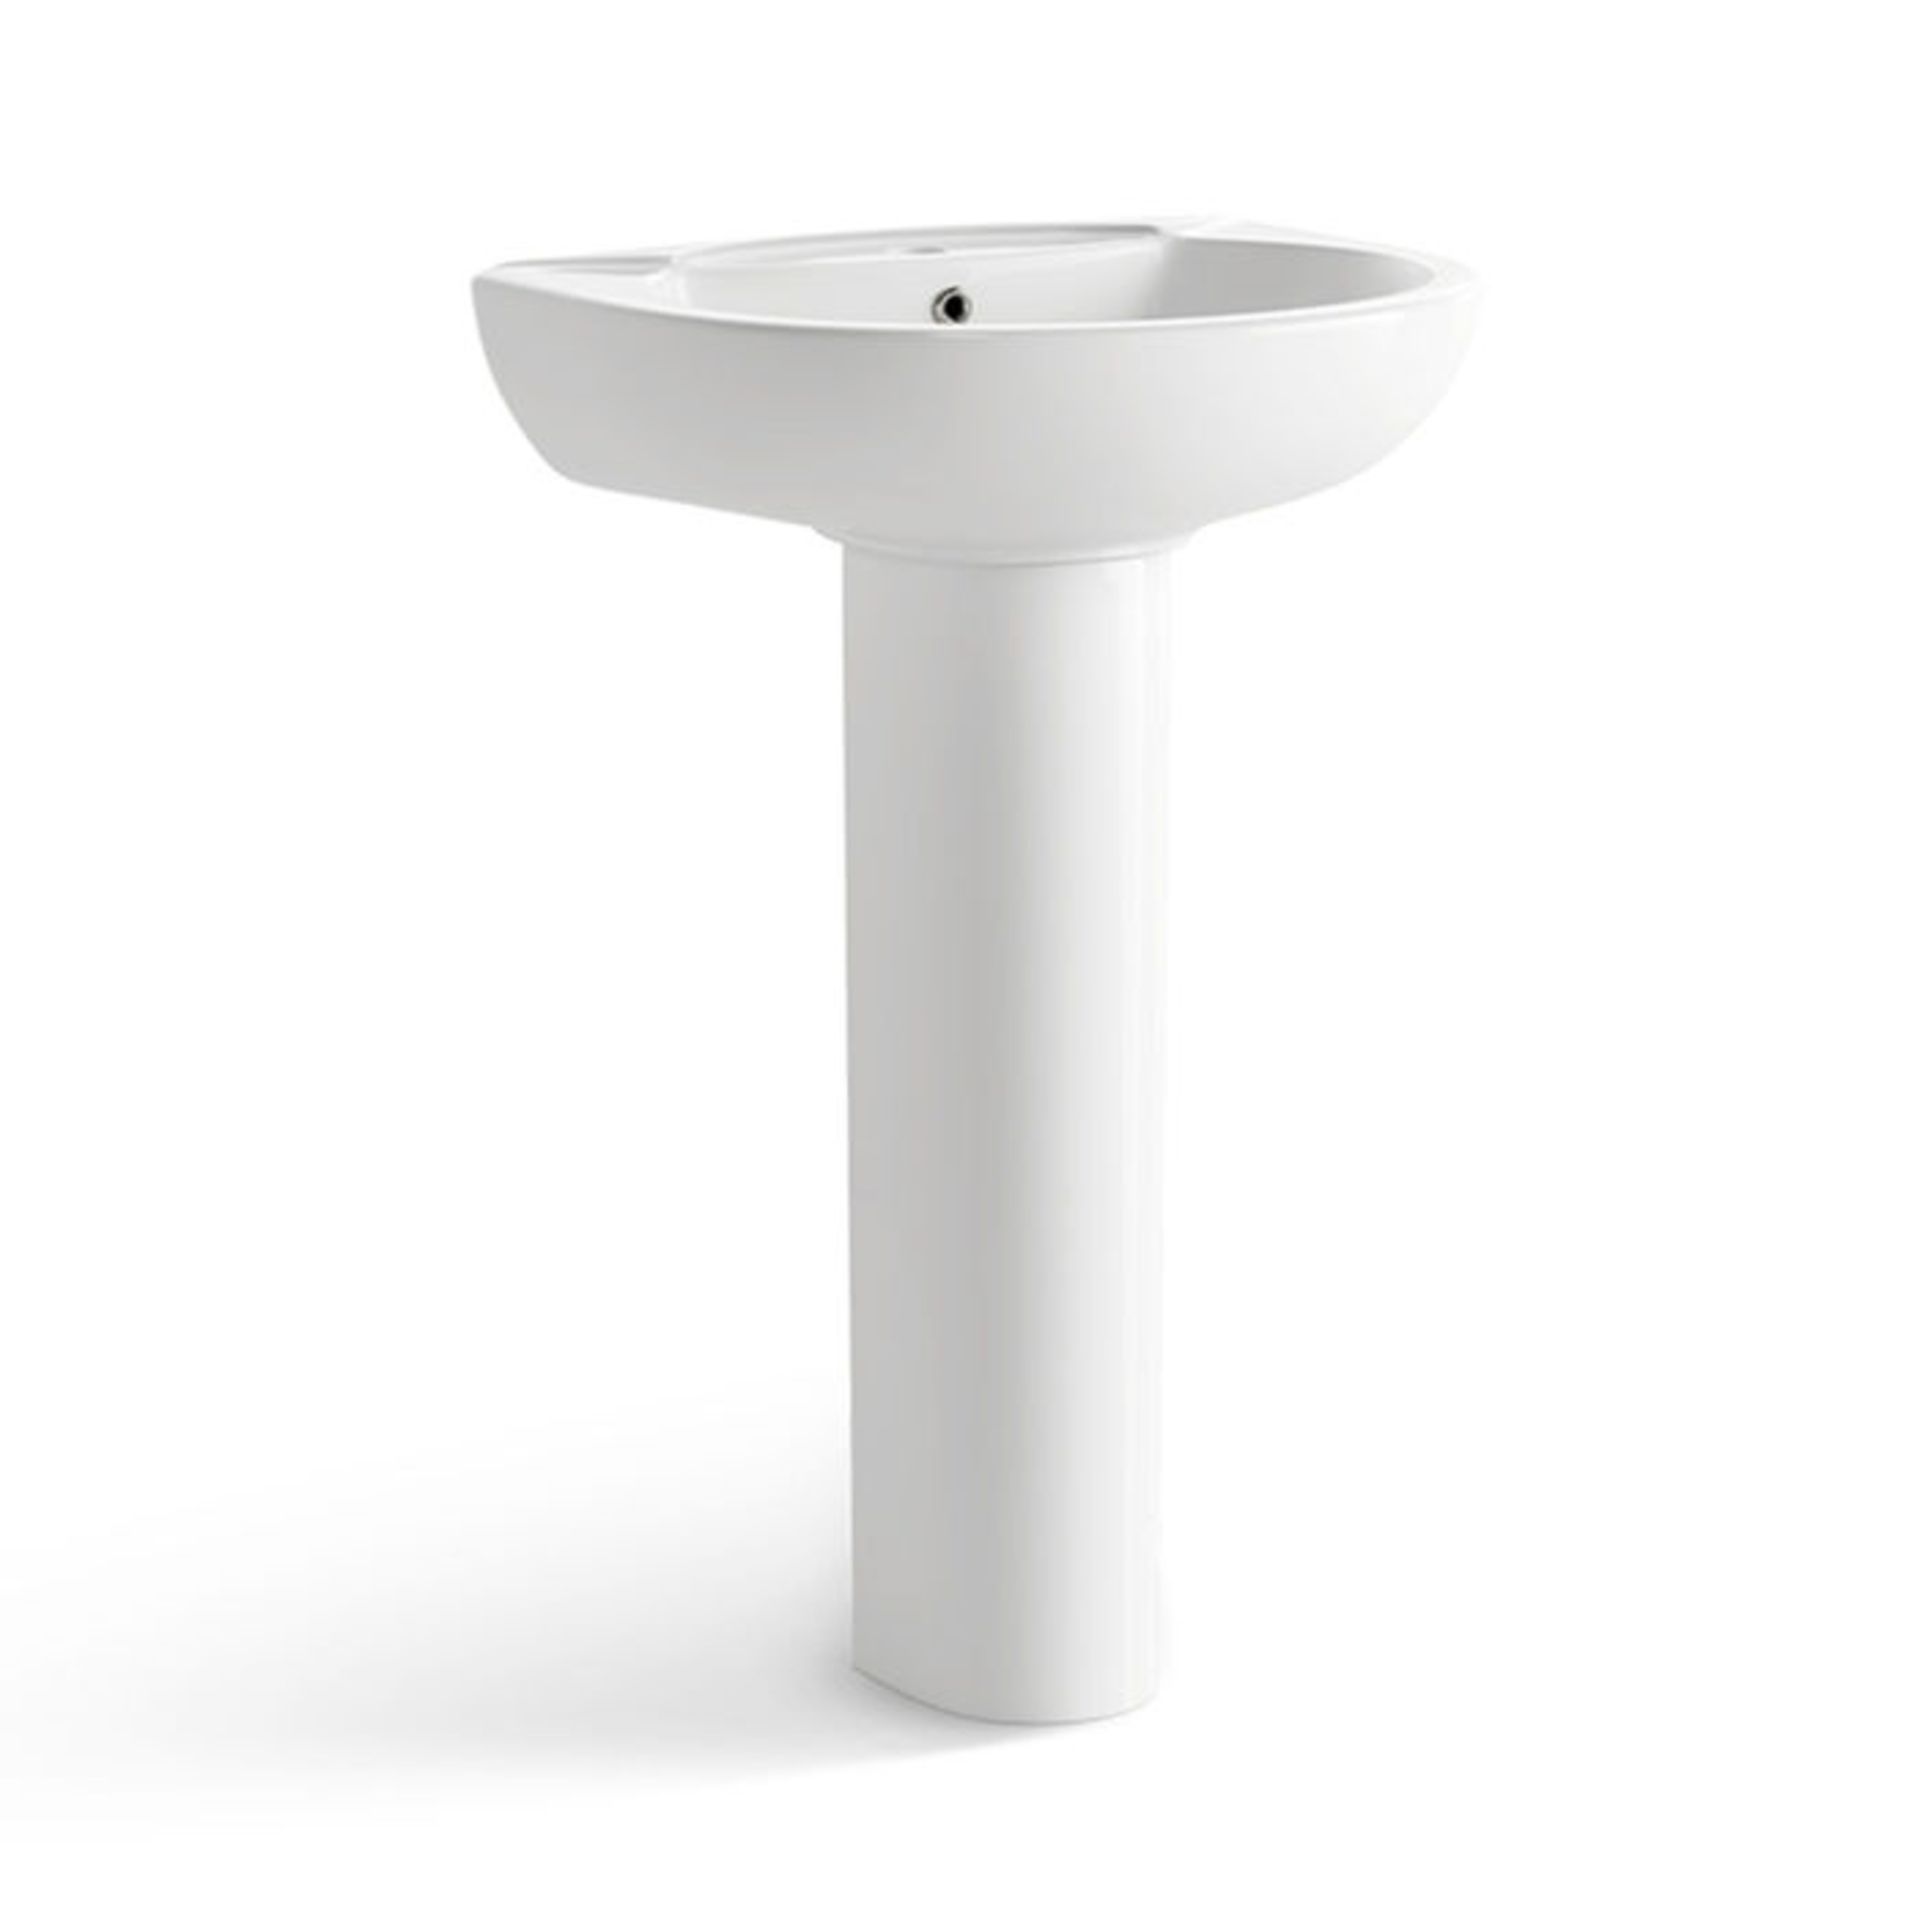 (XX110) Quartz Sink & Pedestal - Single Tap Hole. Made from White Vitreous China and finished w...